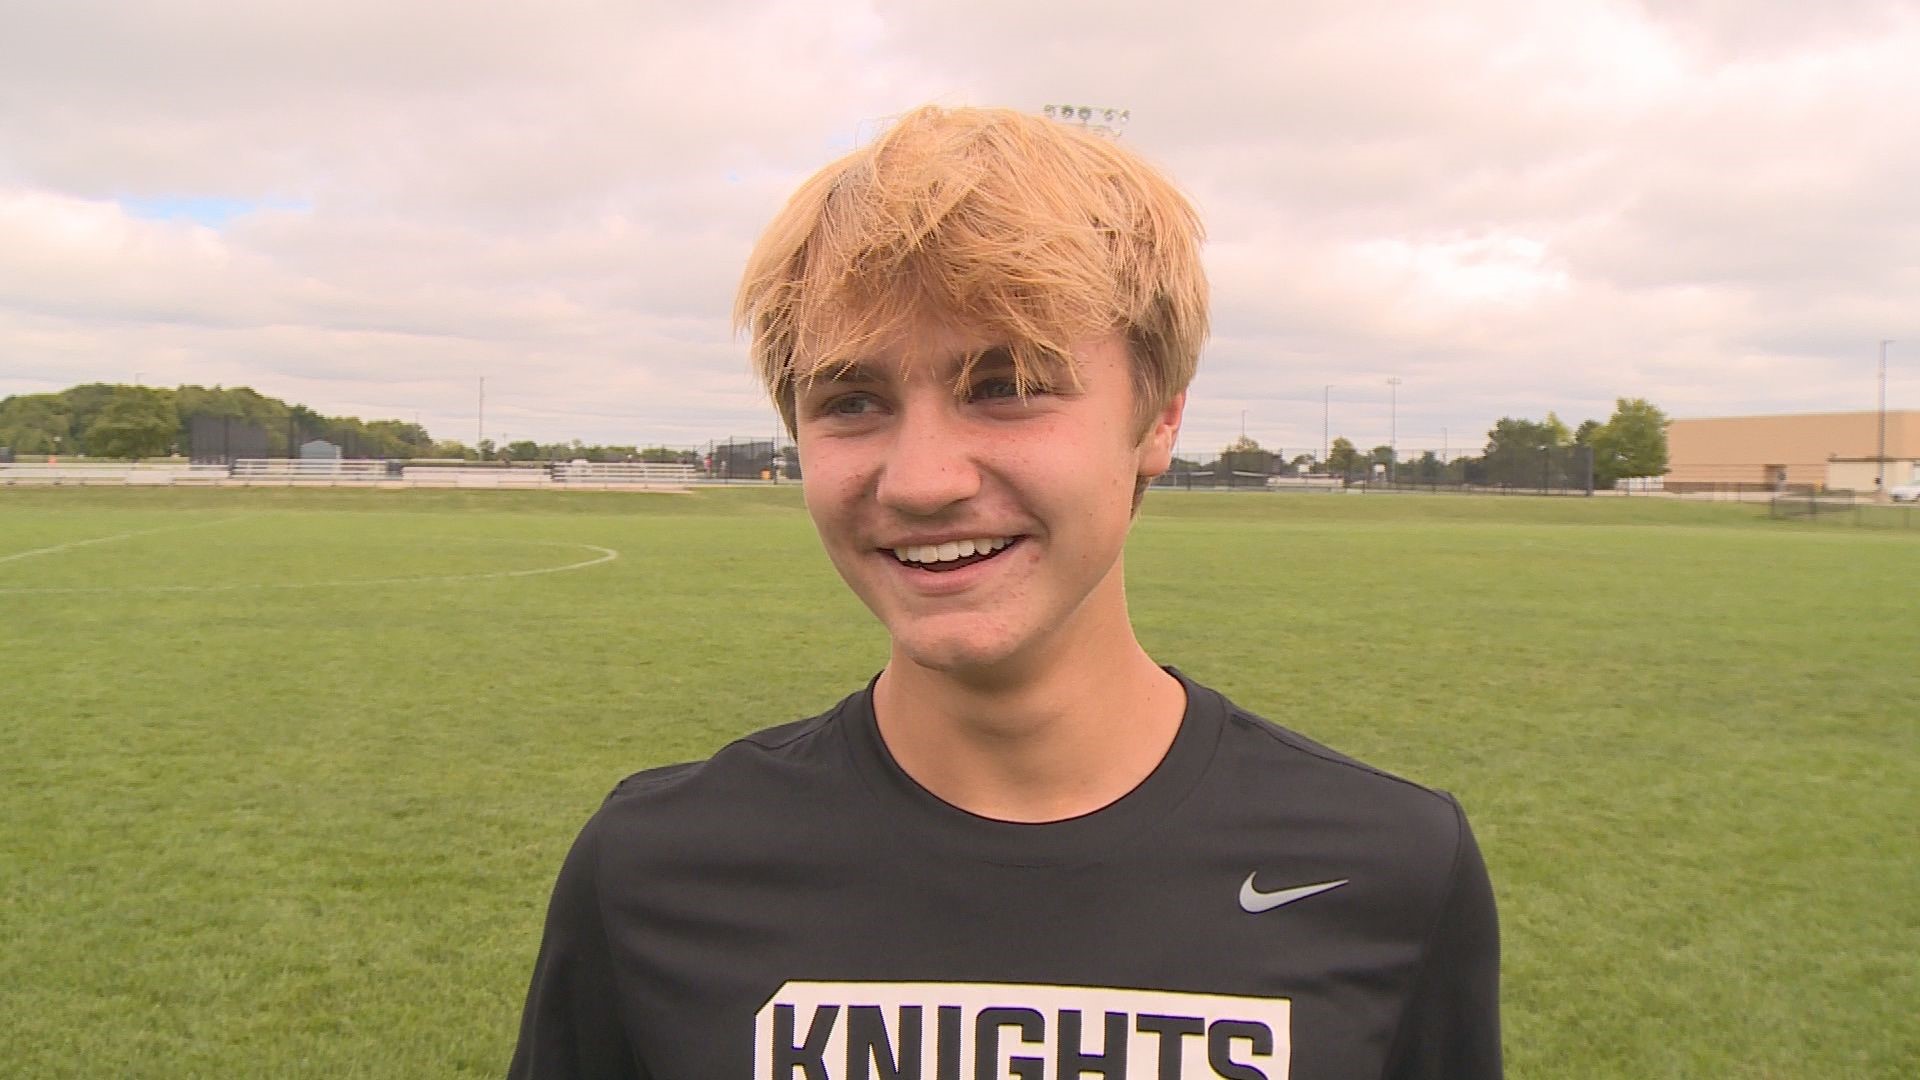 His leadership has already allowed him to be named captain of the Knights varsity soccer team. He also runs track.